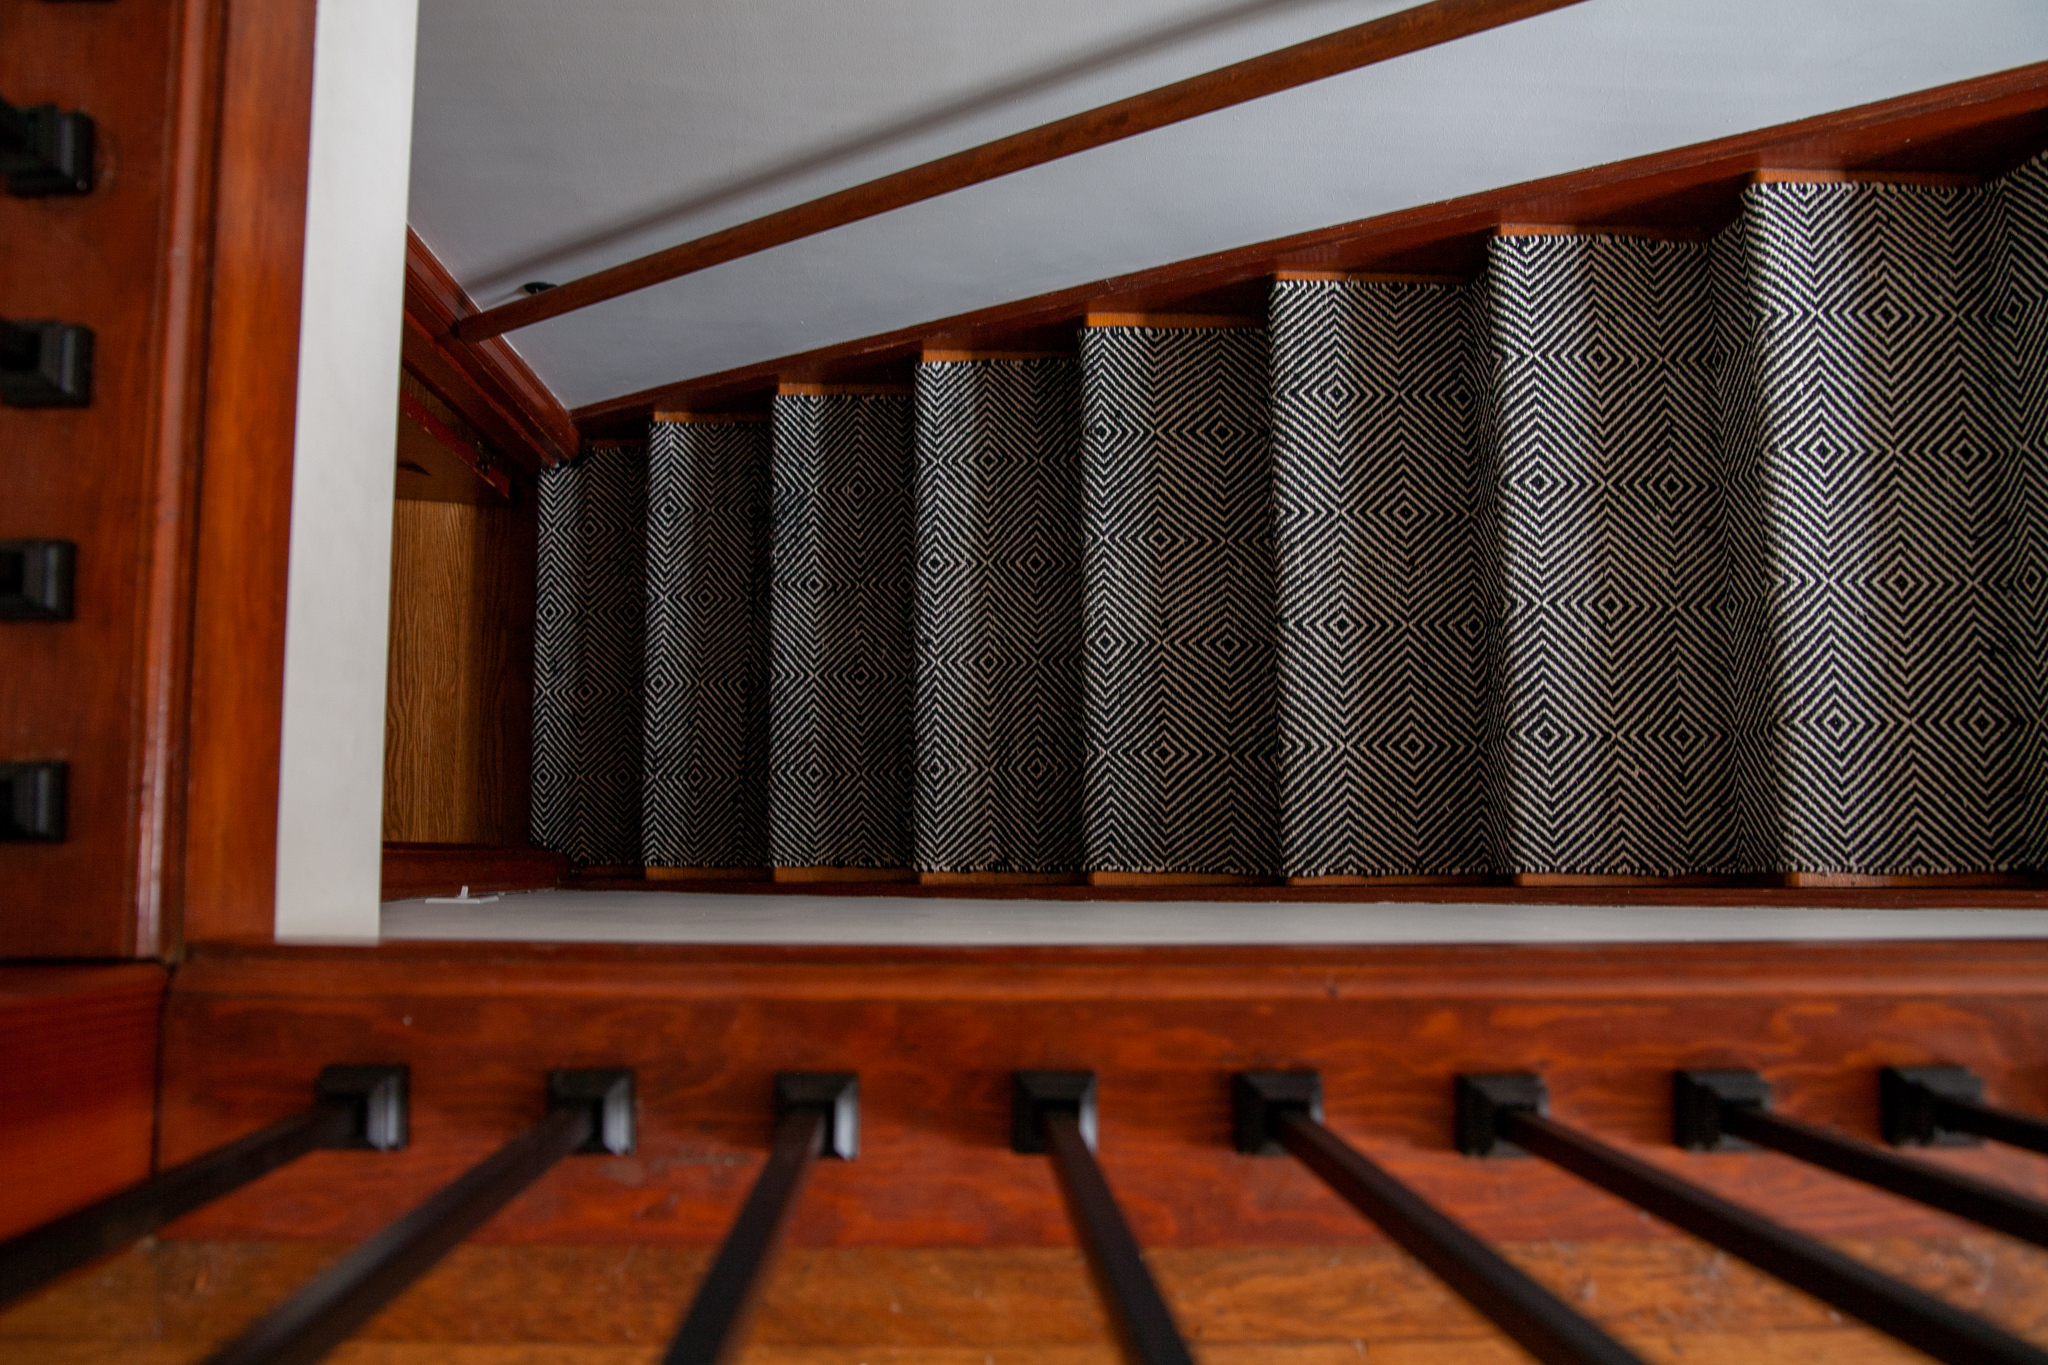 How to Install a DIY Stair Runner ⋆ Growing Up Kemper